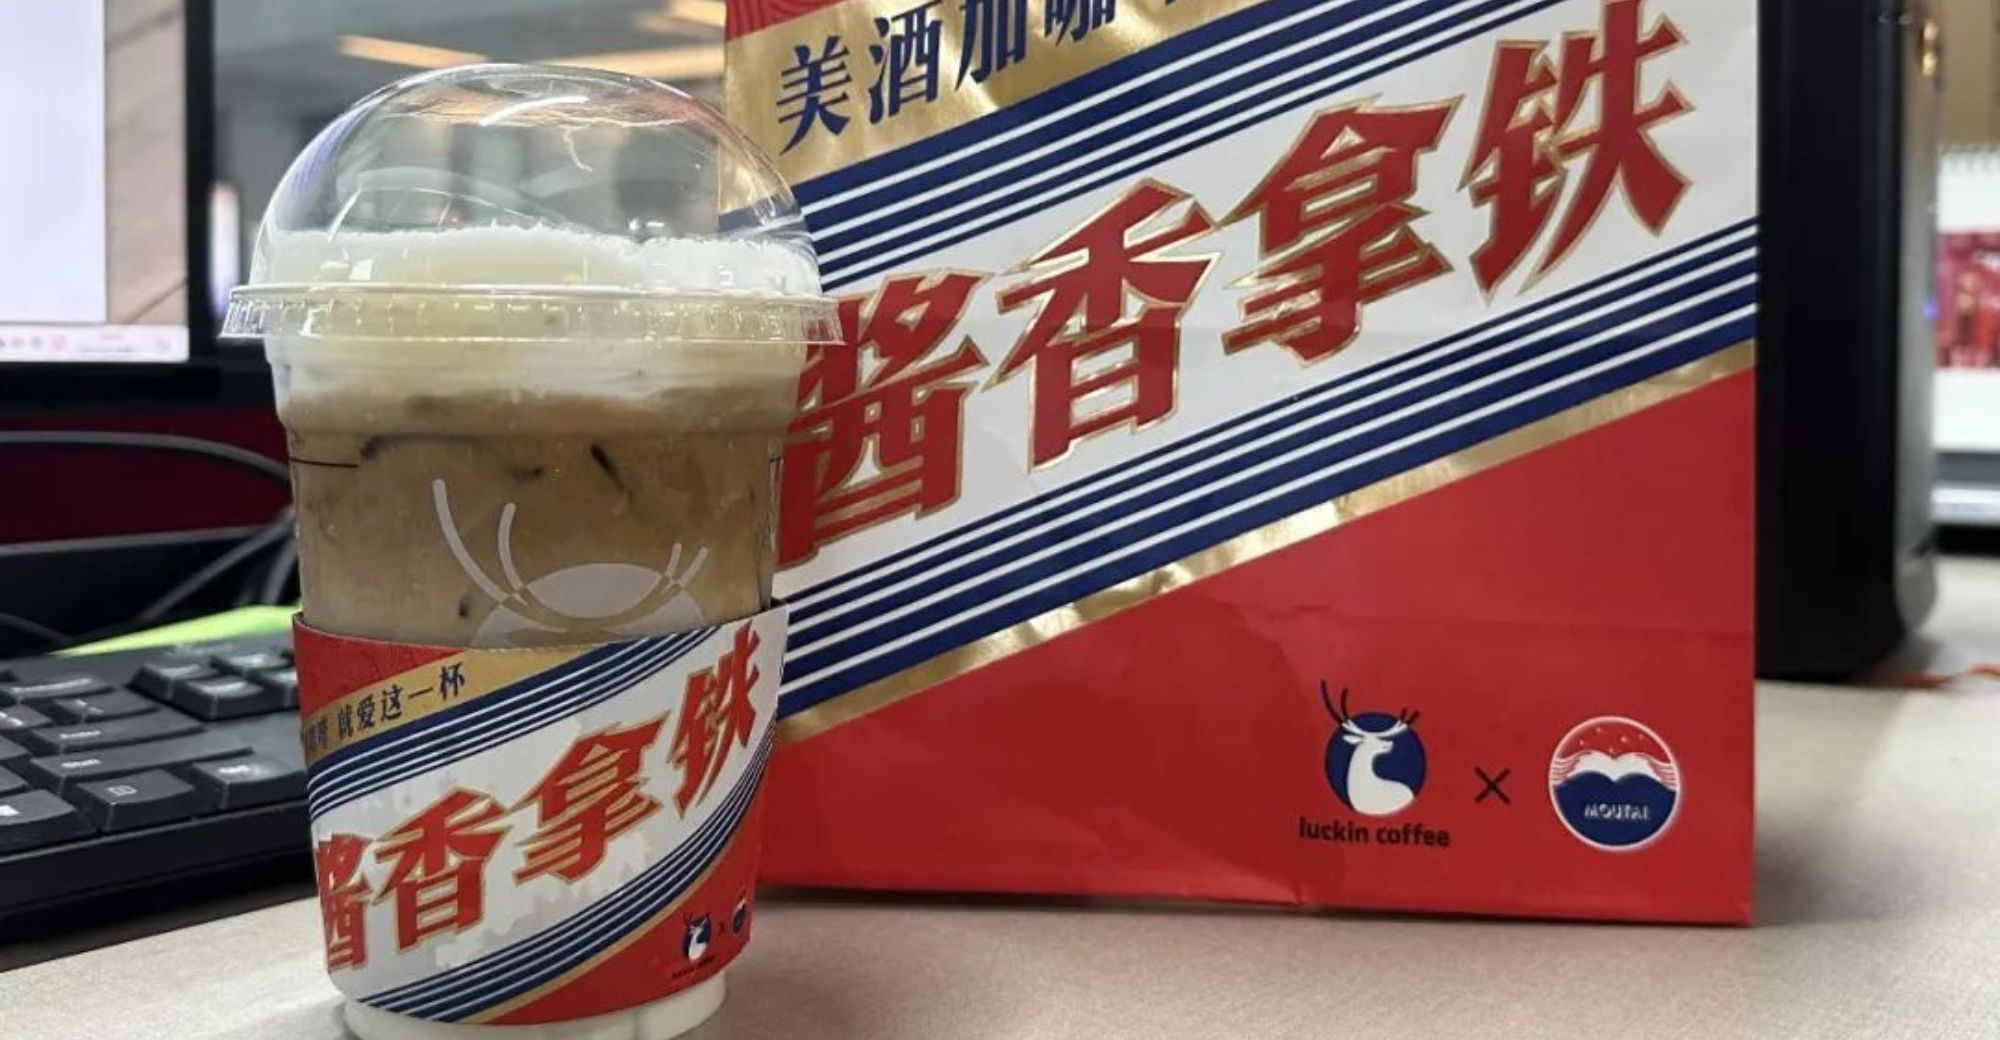 Luckin Coffee and Moutai Jointly Launch the “Sauce Fragrance Latte”